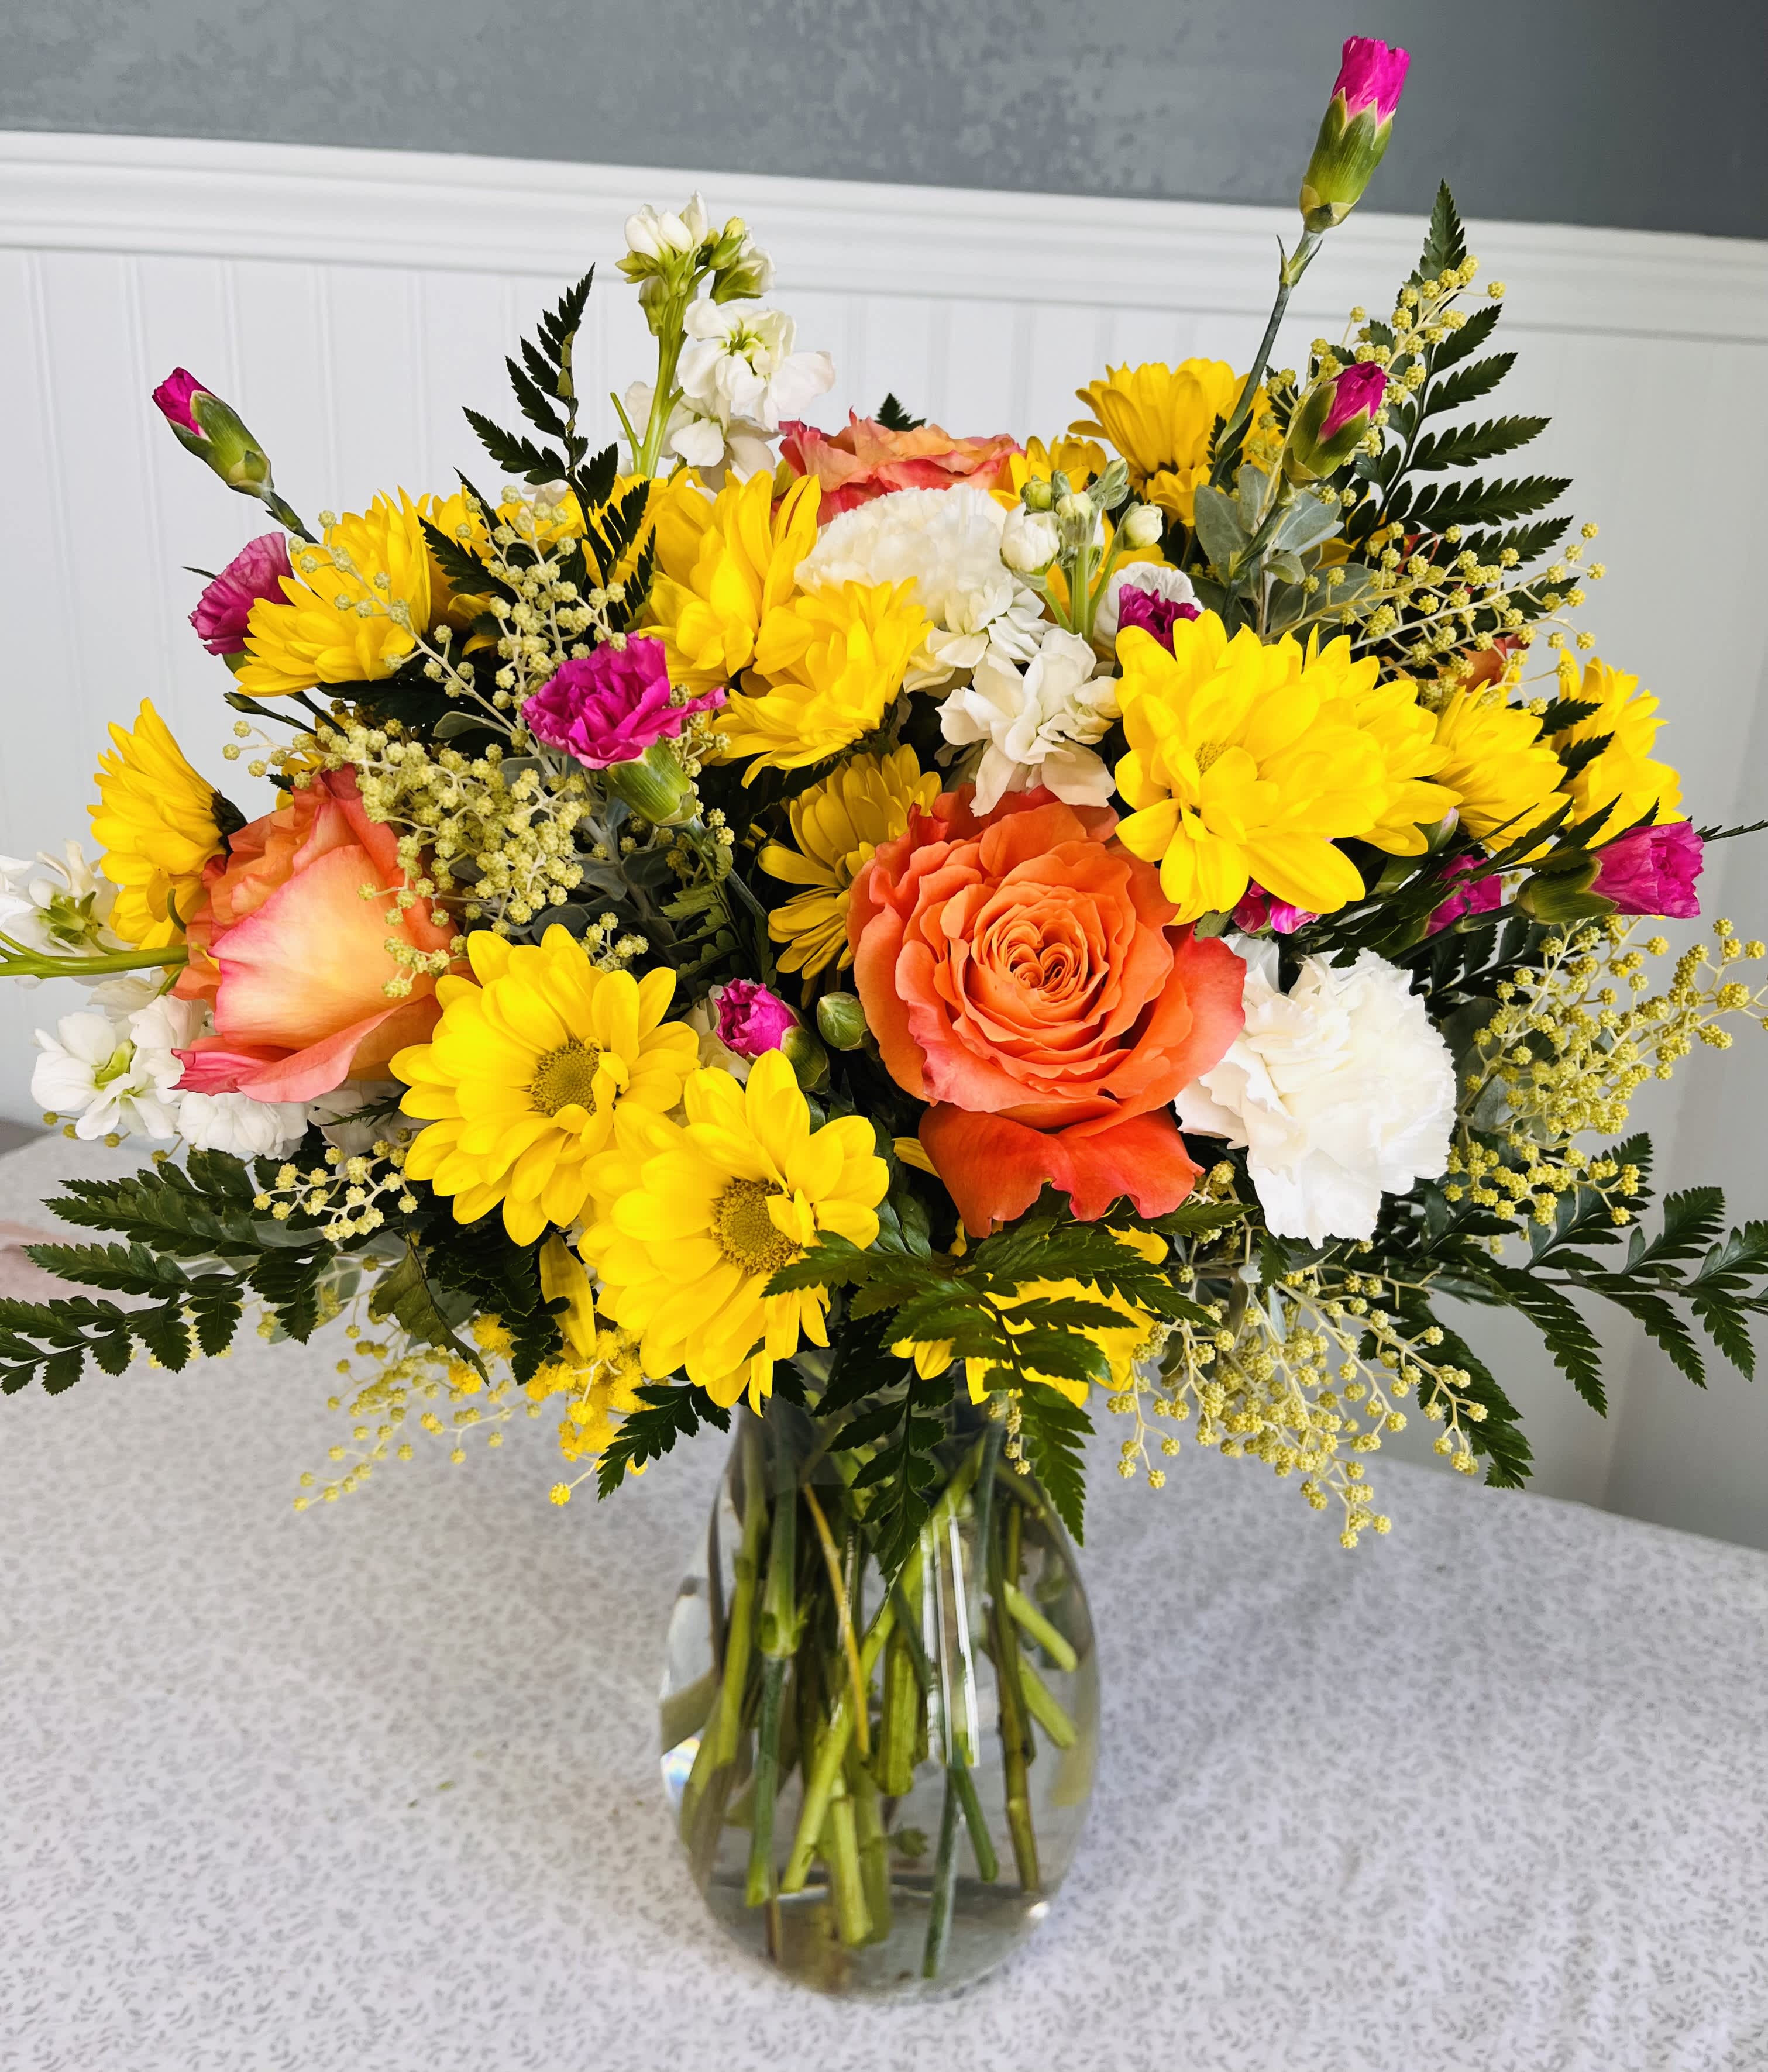 Citrus Twist - Bring a little zest into your life with touches of yellow and orange. Send this to a friend or loved one and brighten their day!